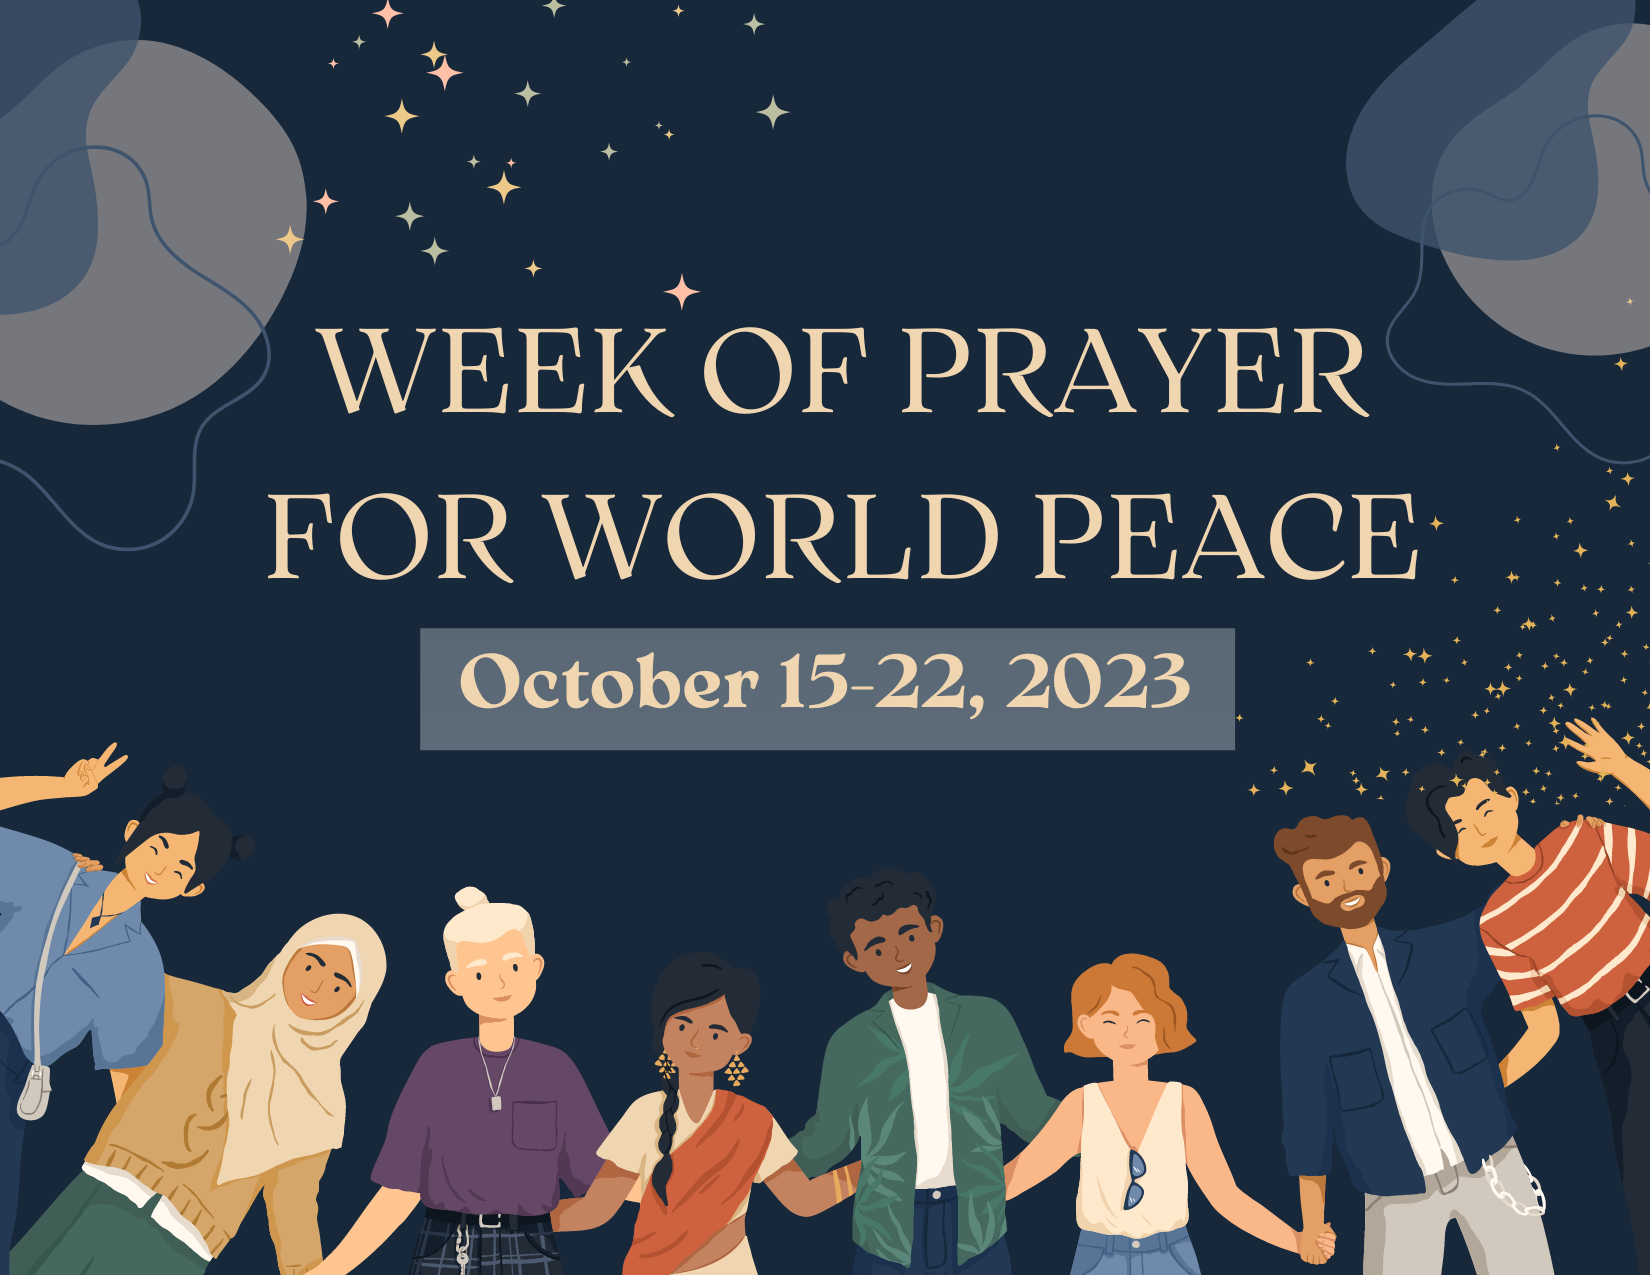 Week of Prayer for World Peace. october 15-22, 2023. People of different faith traditions holding hands.